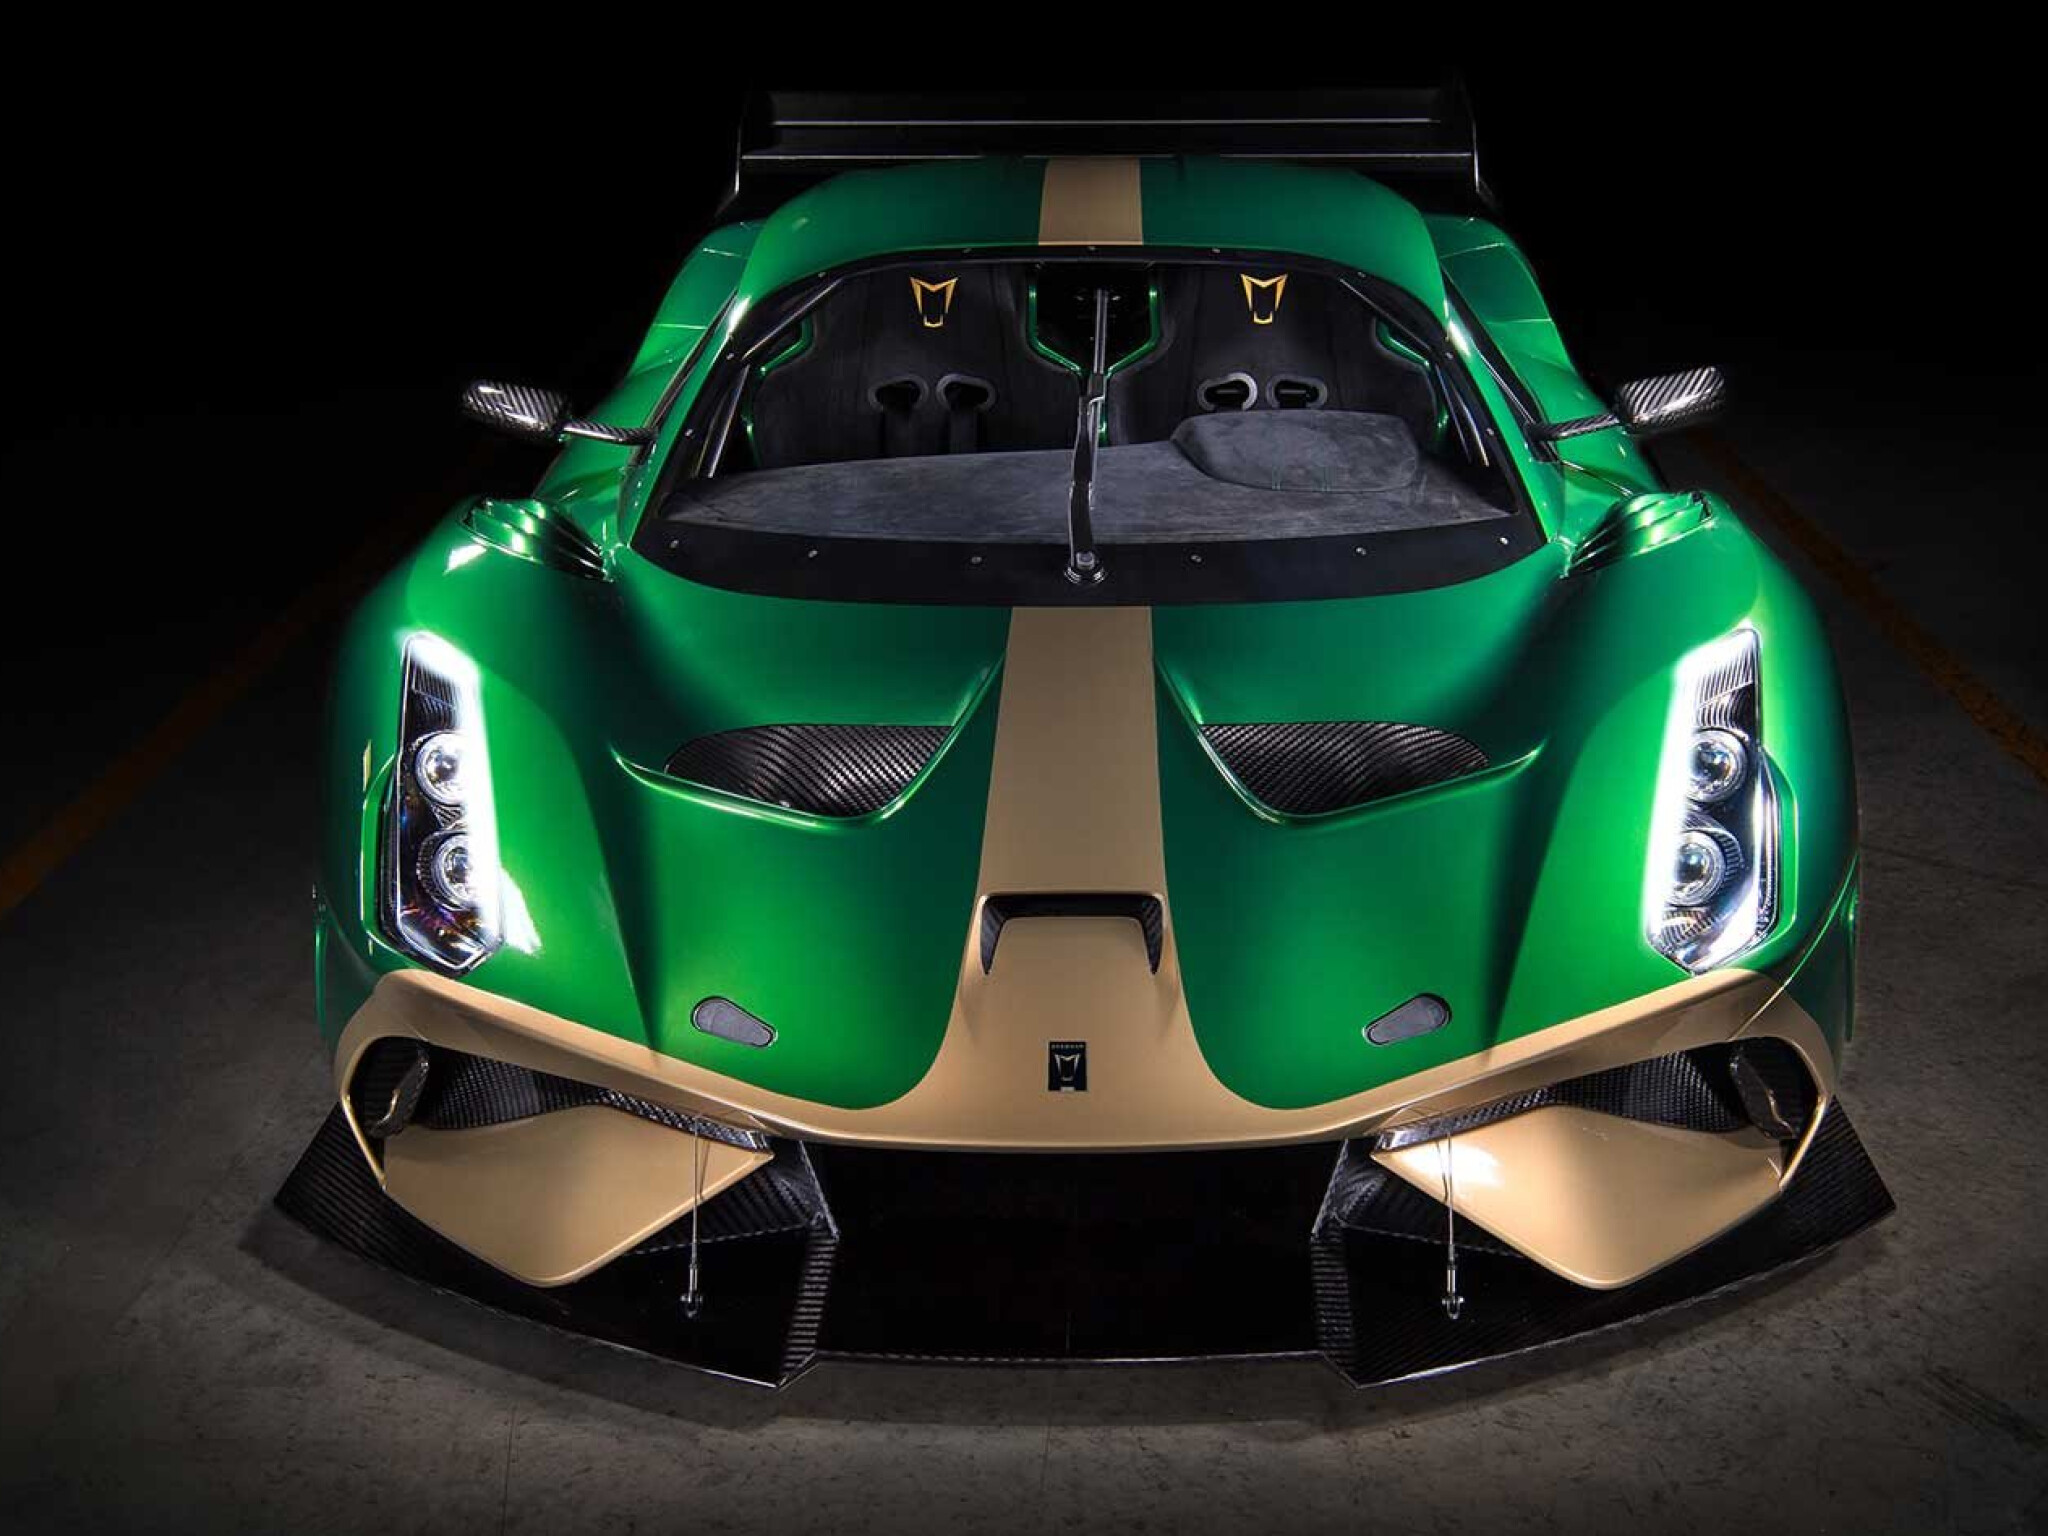 Brabham BT62 supercar tips the scales at 1600kg … of downforce. Here's how  - Drive